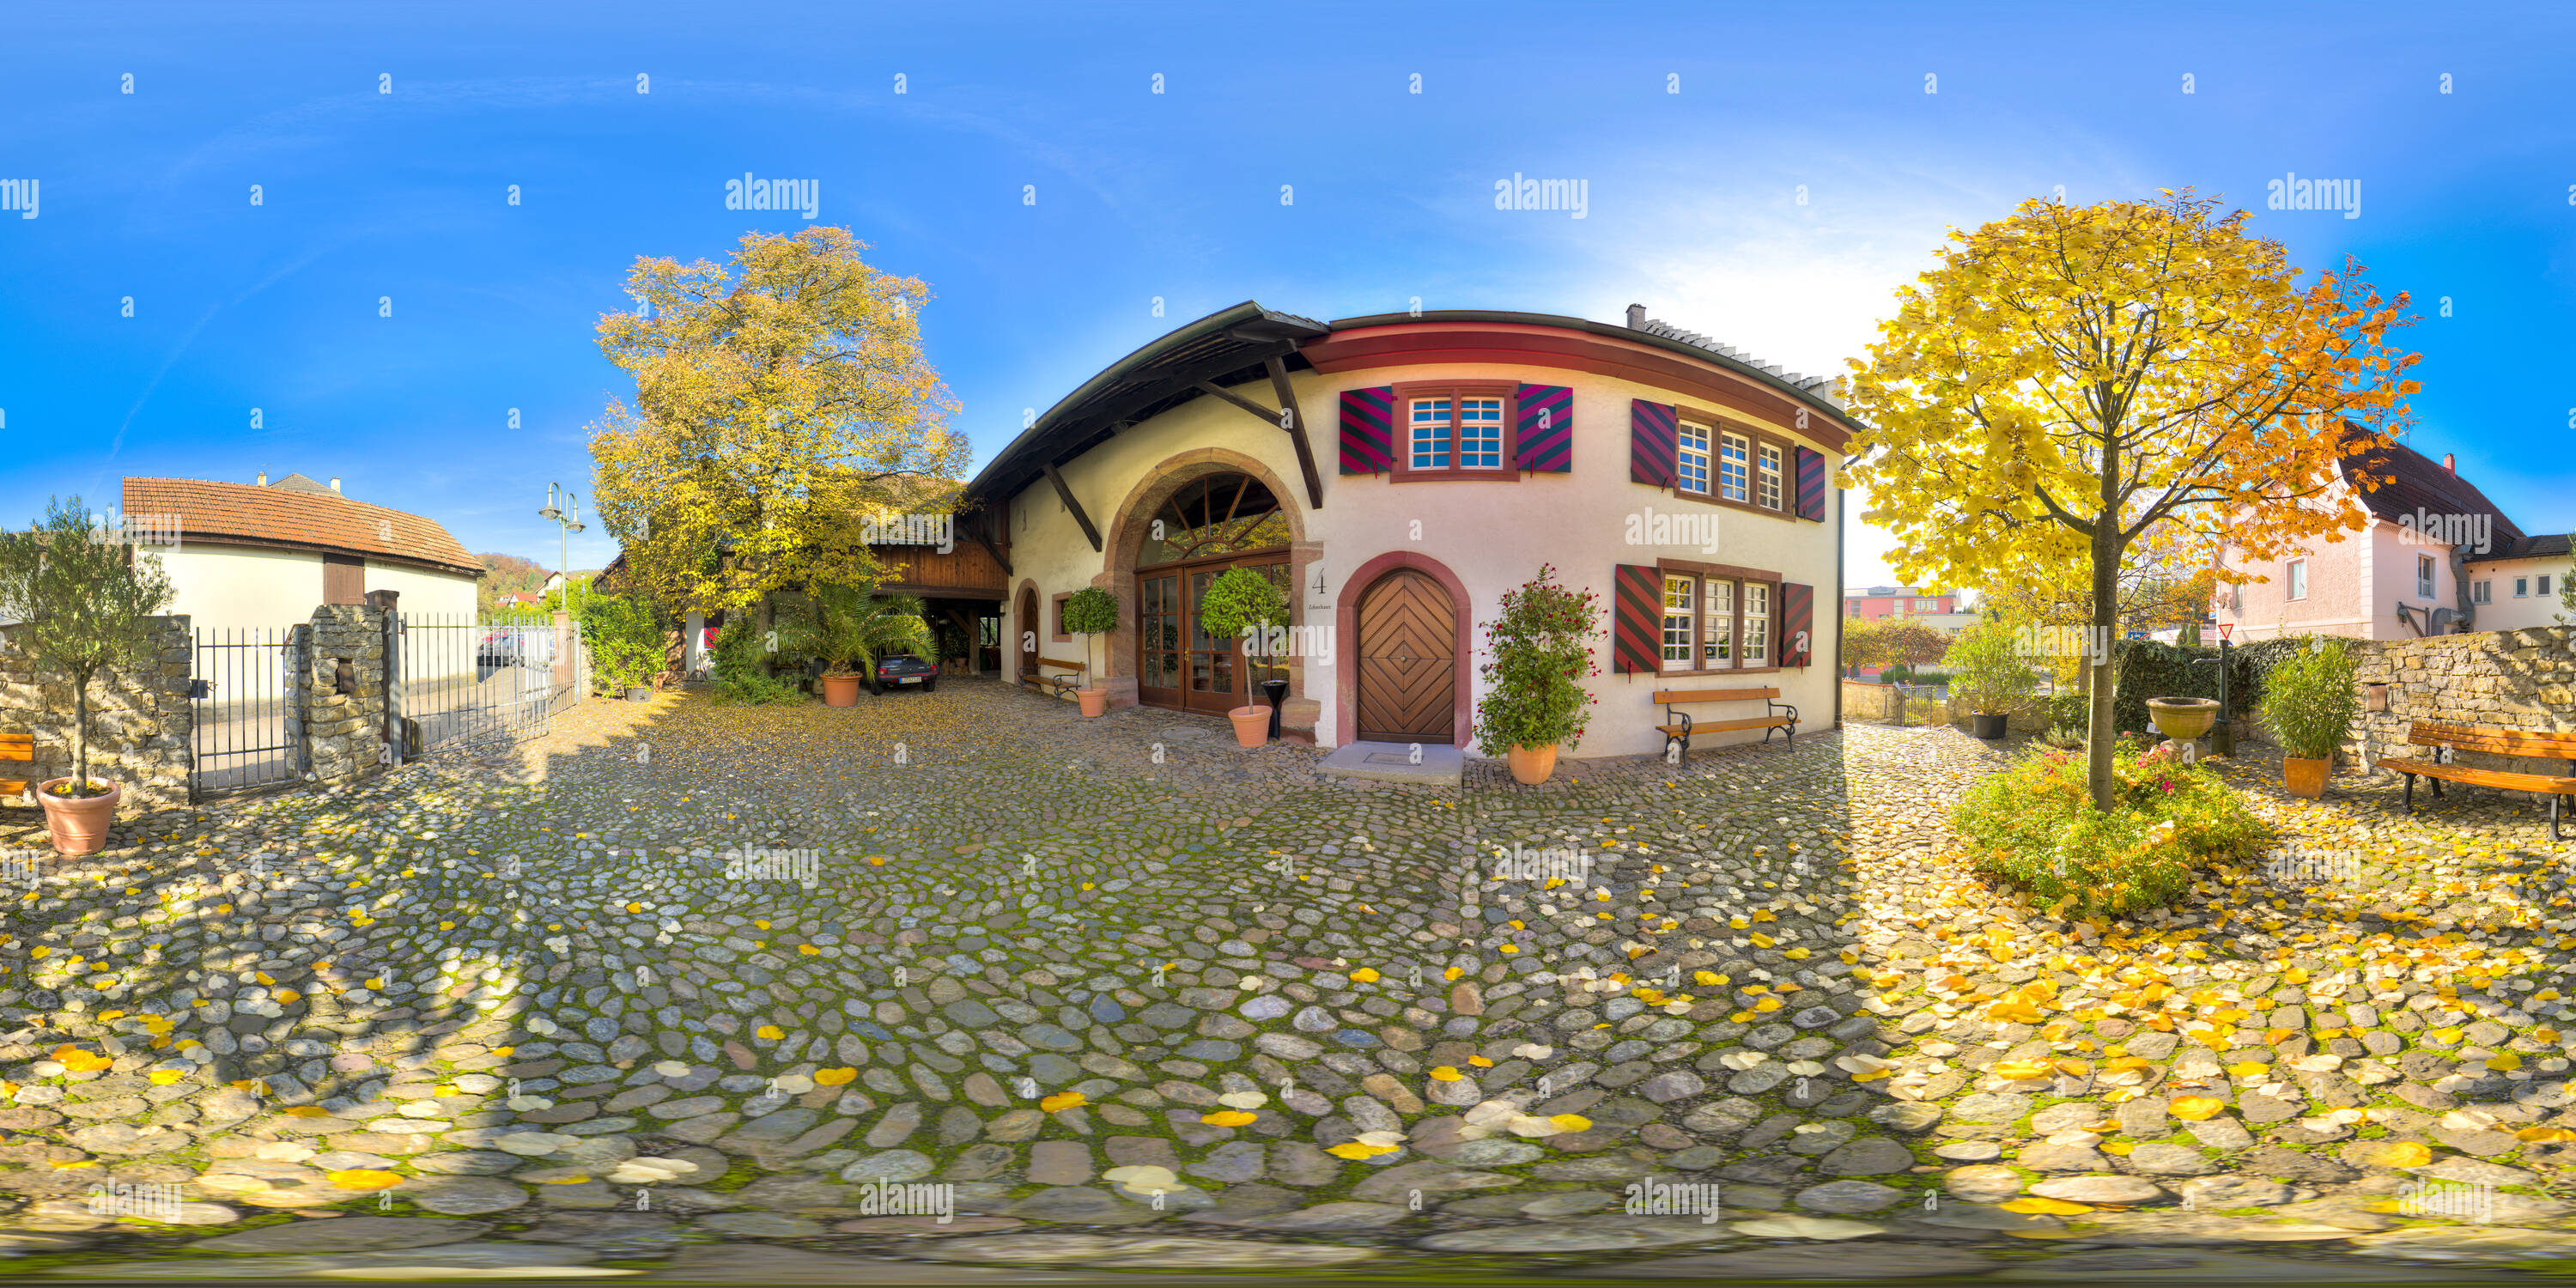 360 degree panoramic view of Grenzach-Wyhlen Zehnthaus